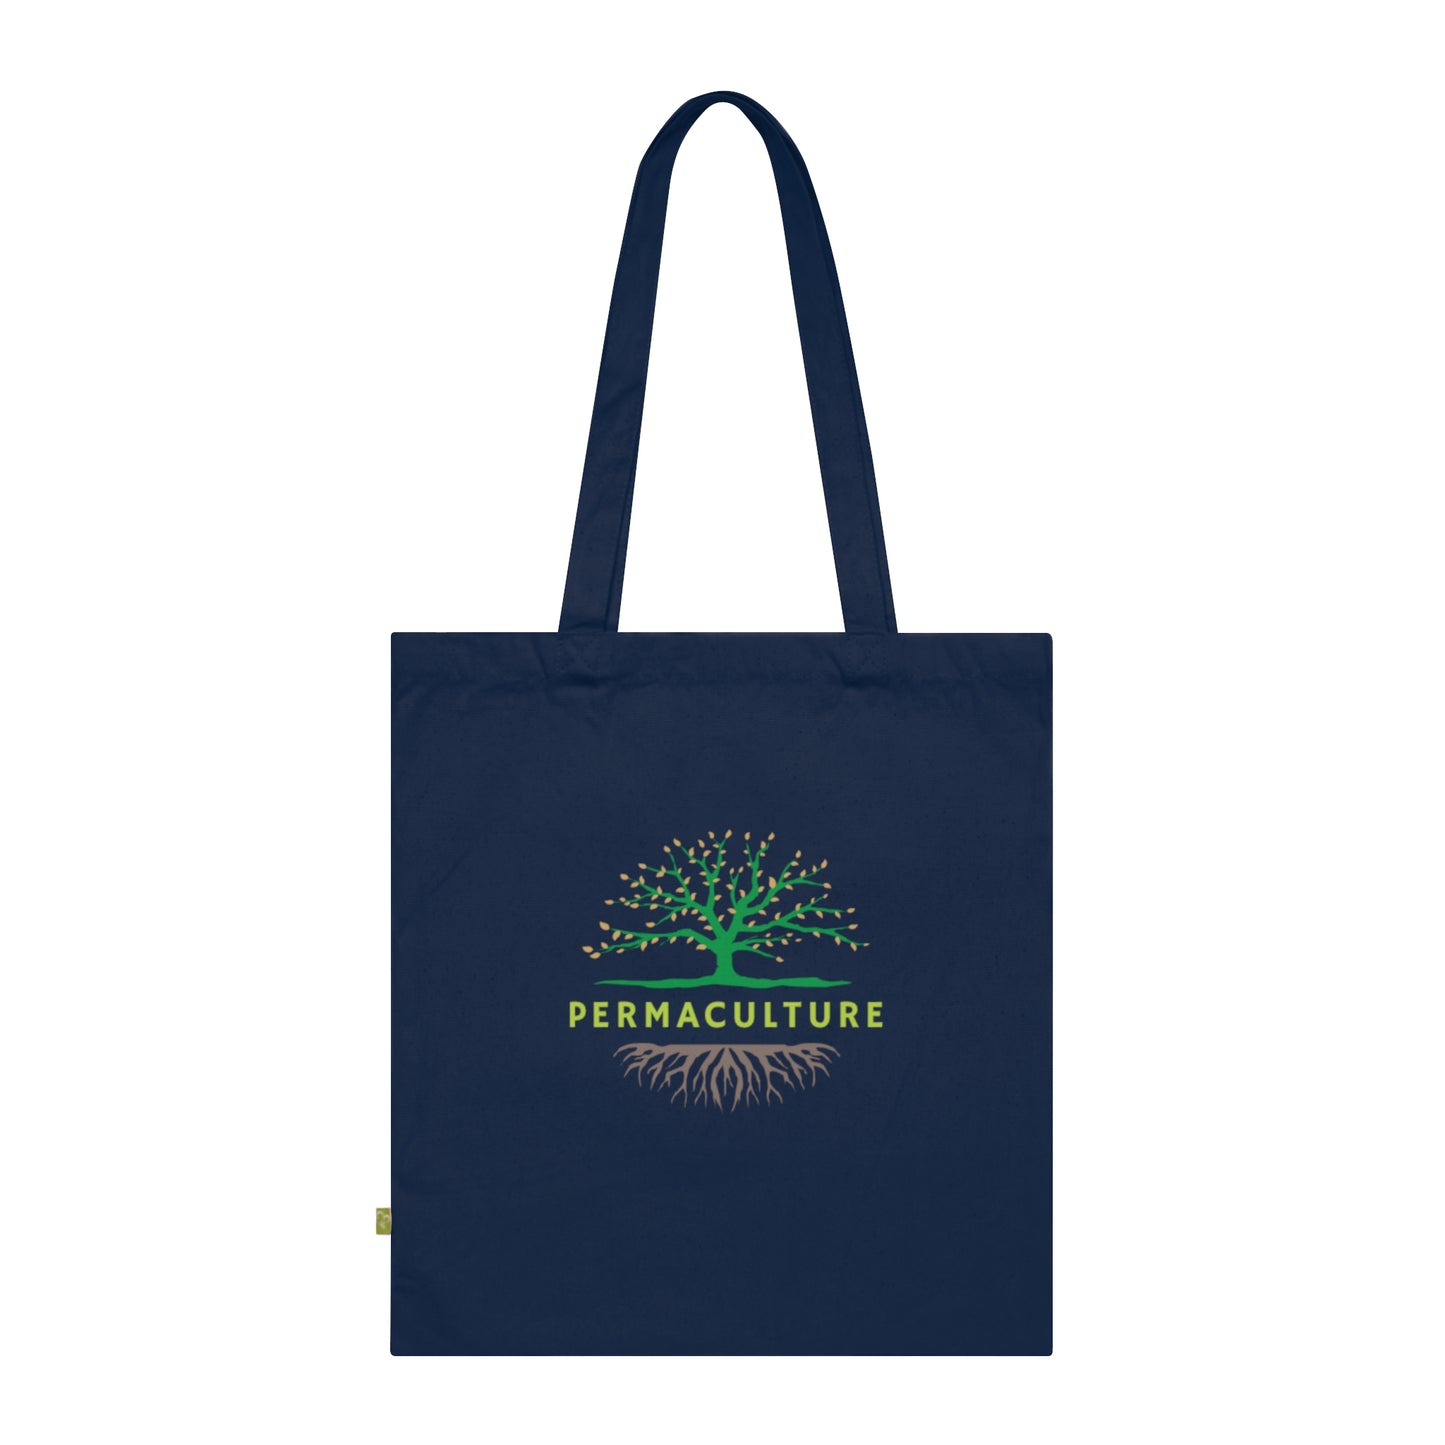 PERMACULTURE Organic Cotton Tote Bag